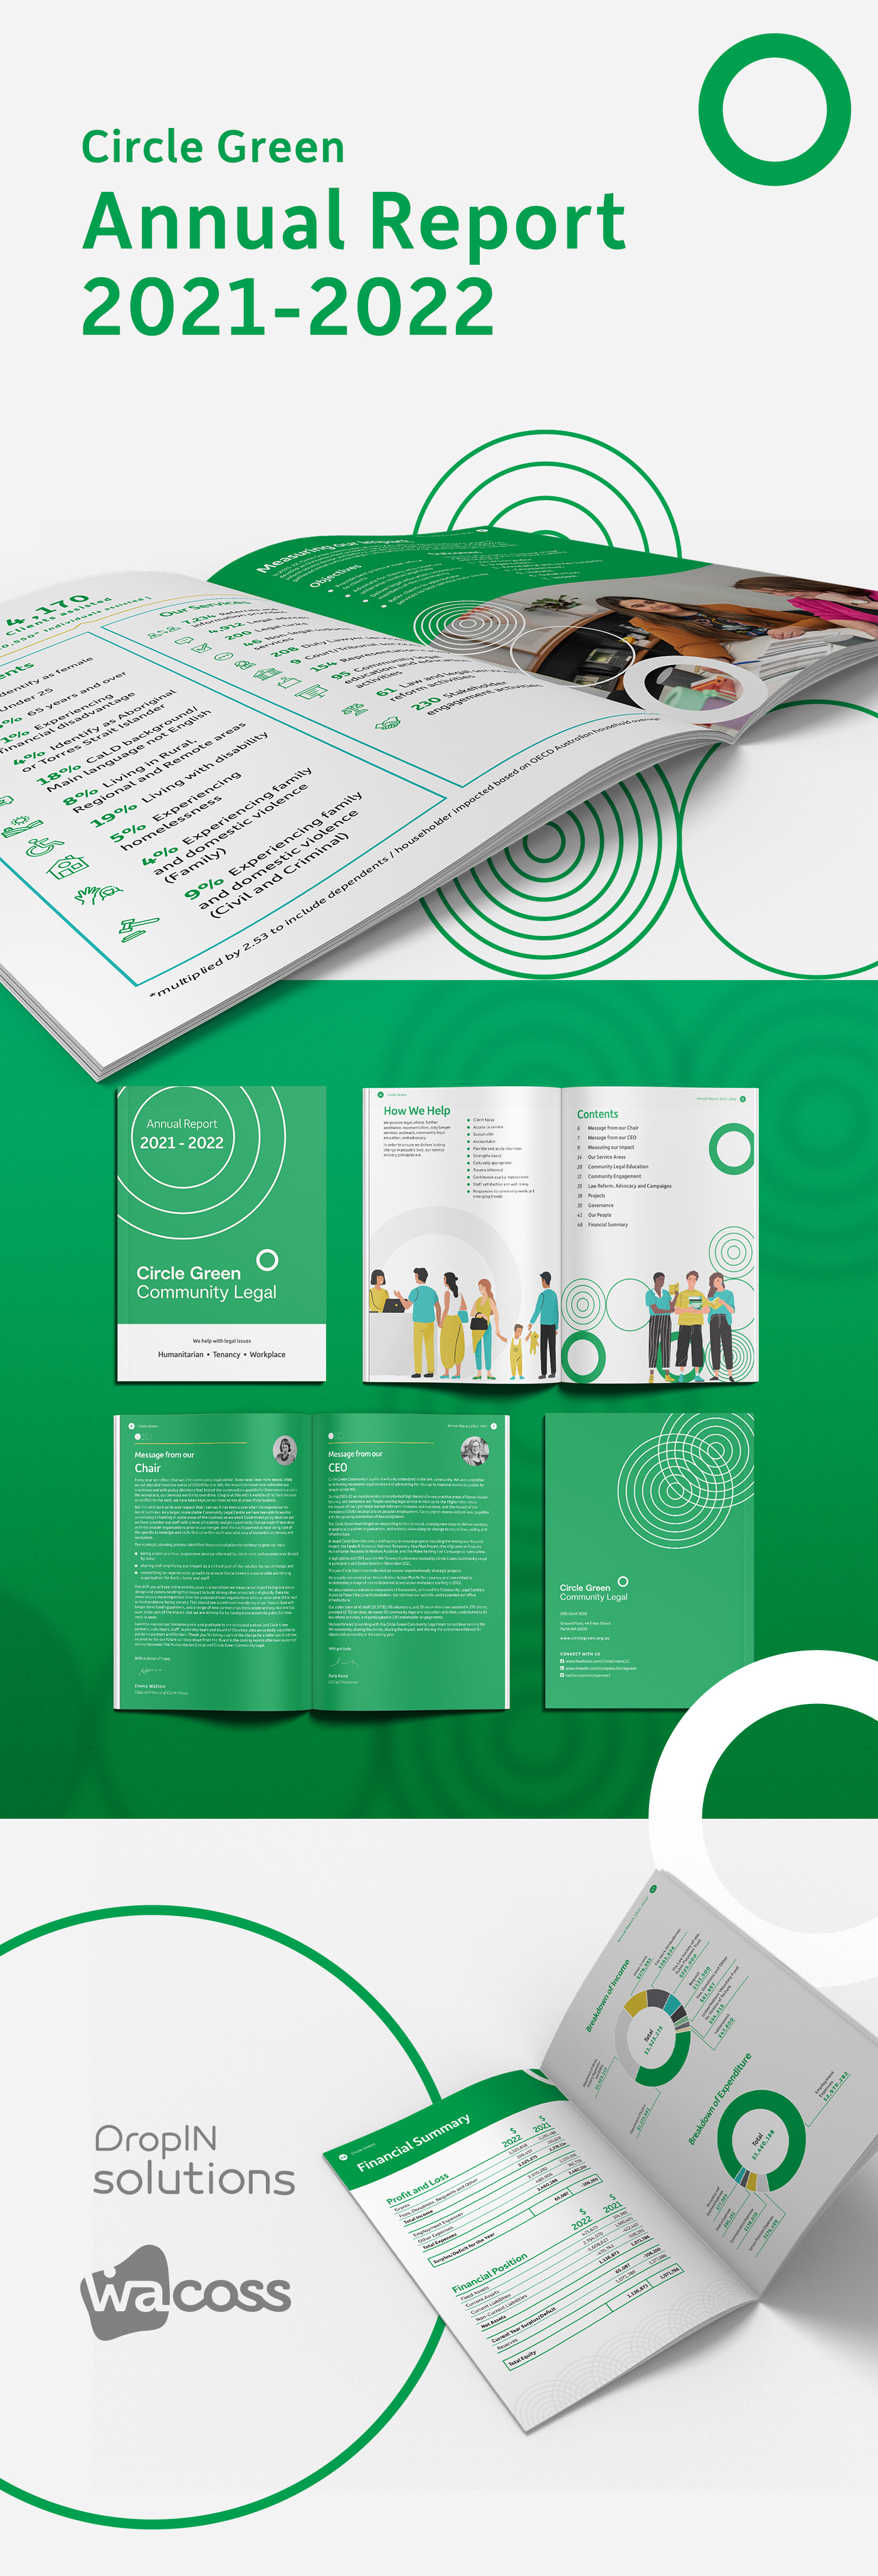 Circle Green Annual Report